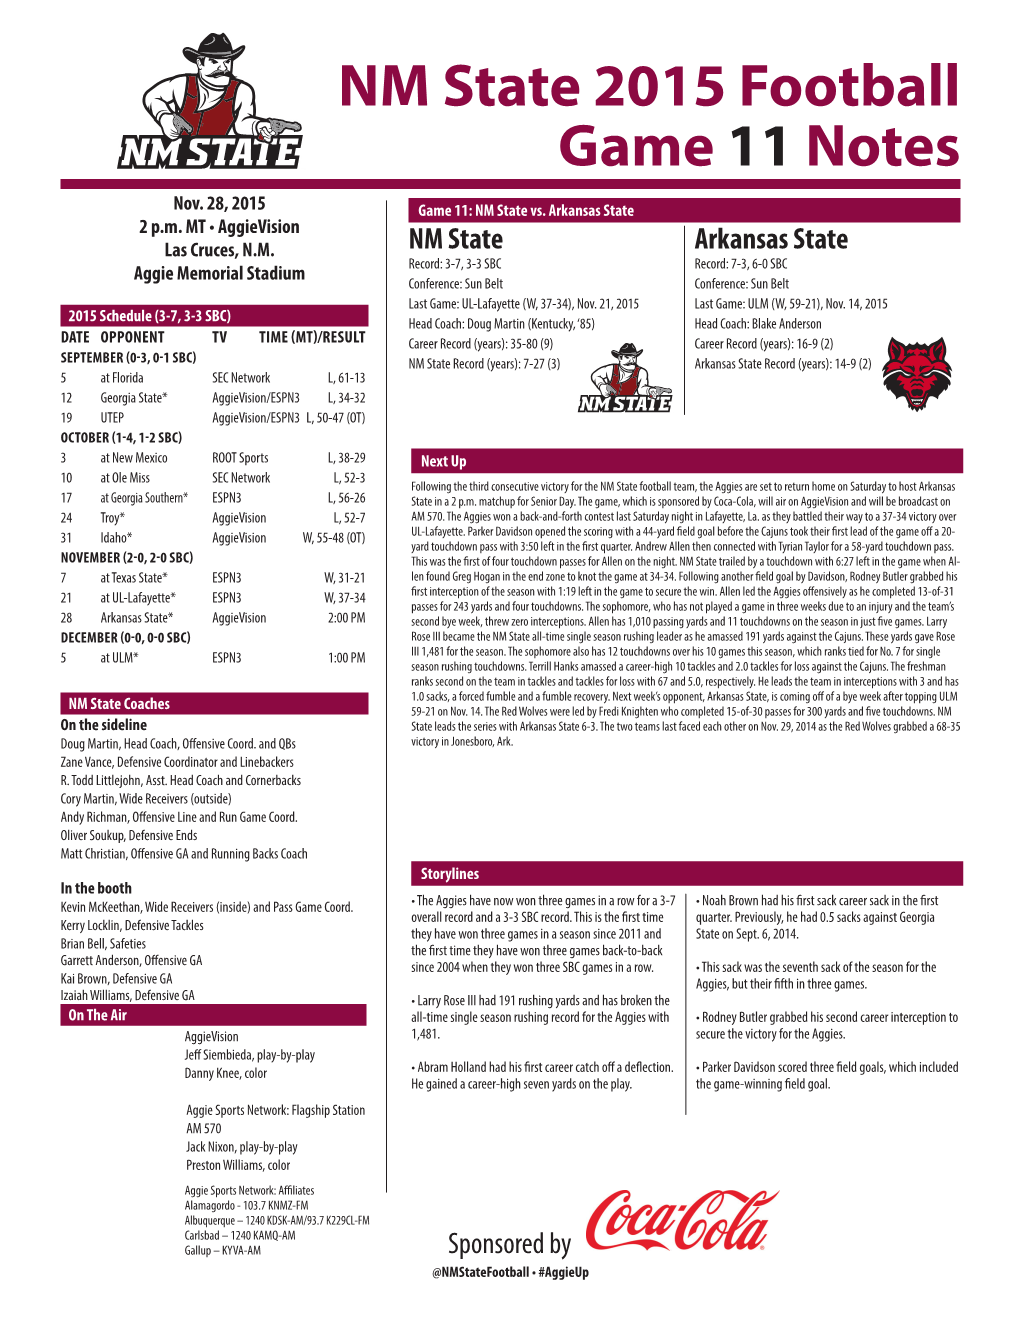 NM State 2015 Football Game 11 Notes